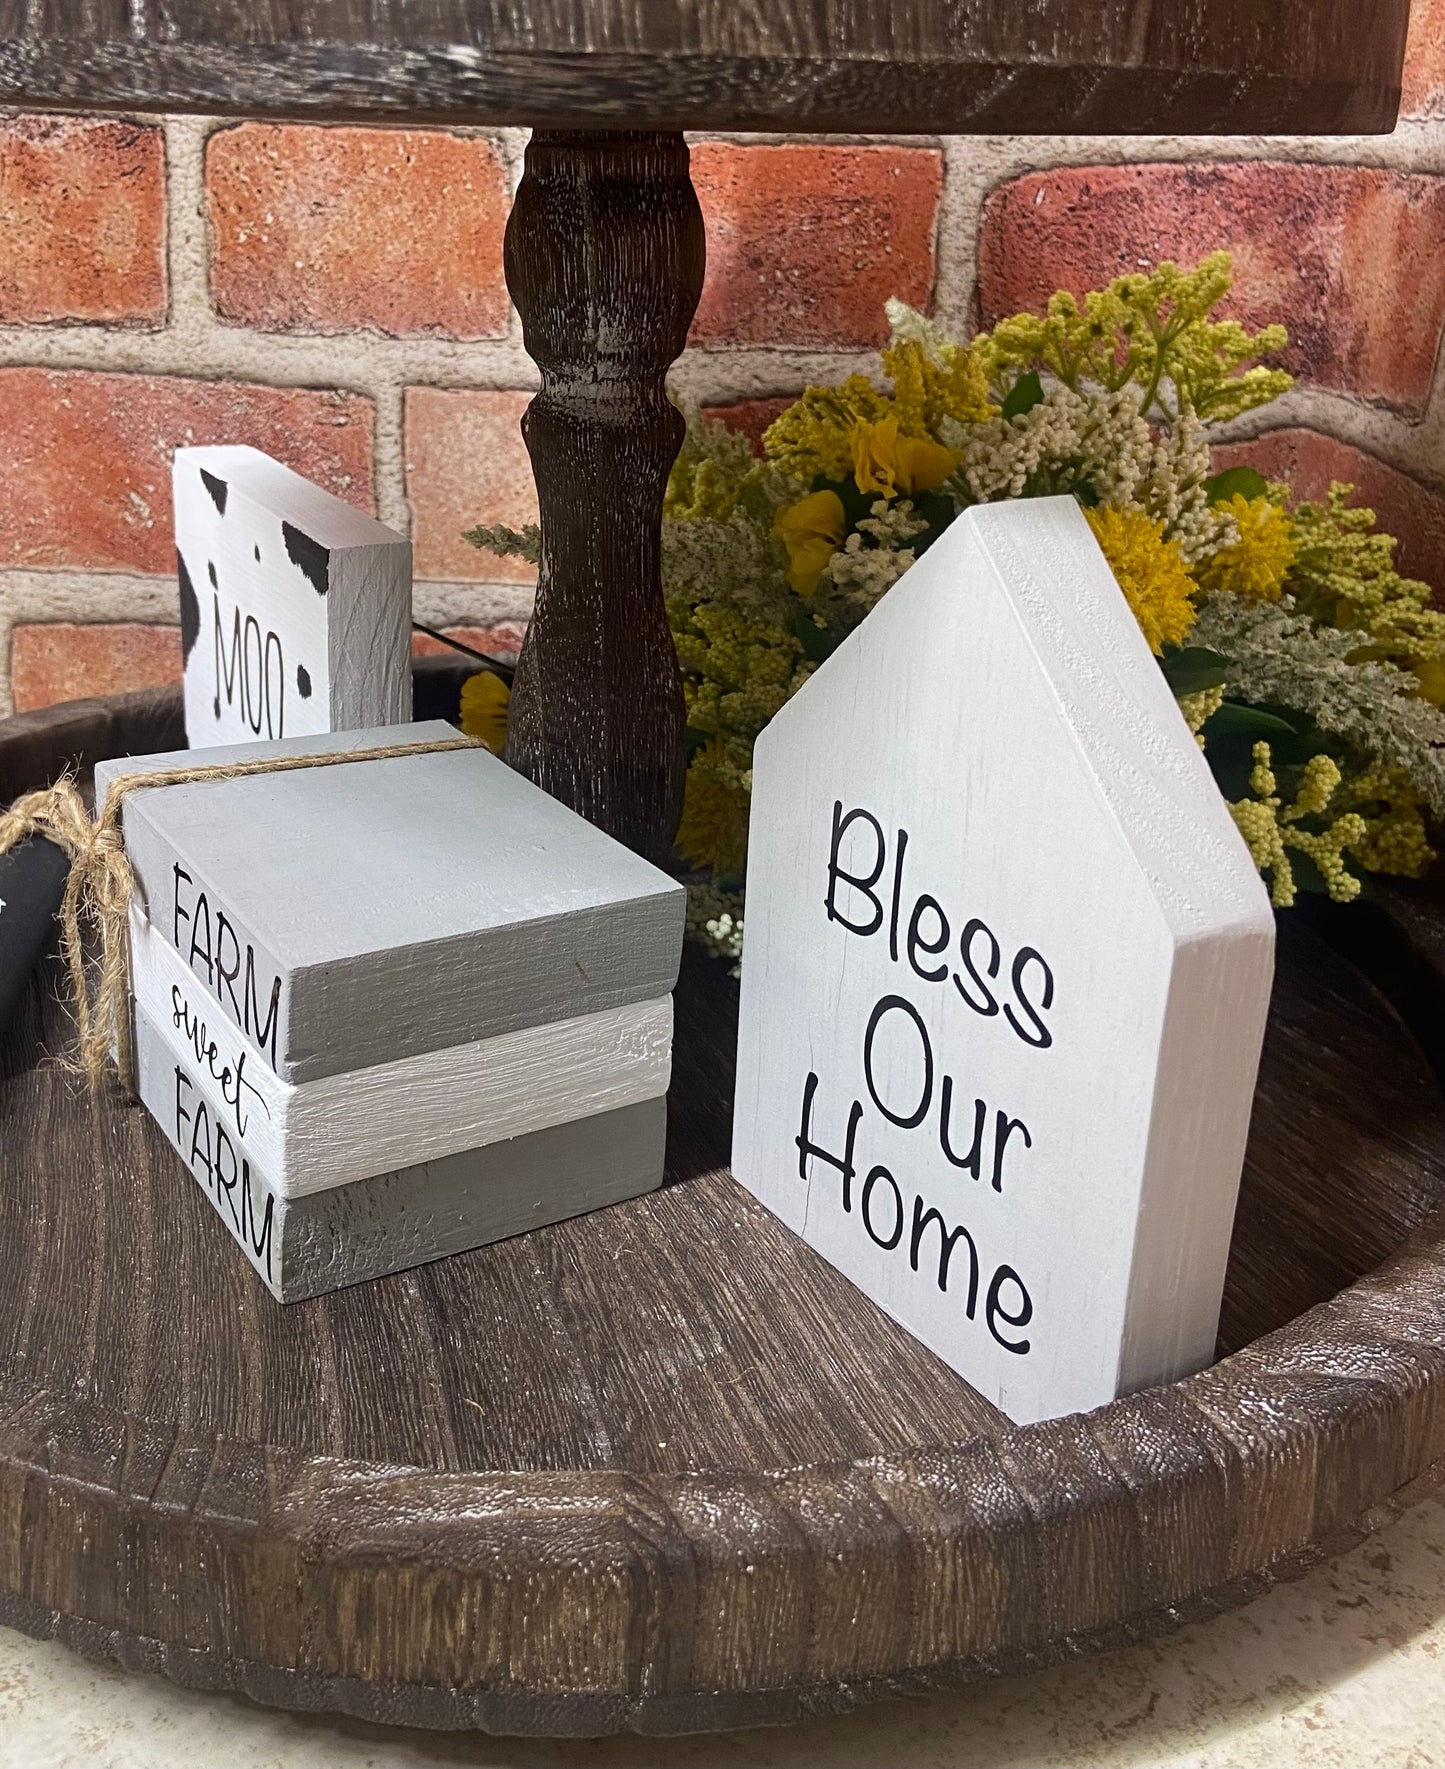 Bless Our Home - Grey Medium House